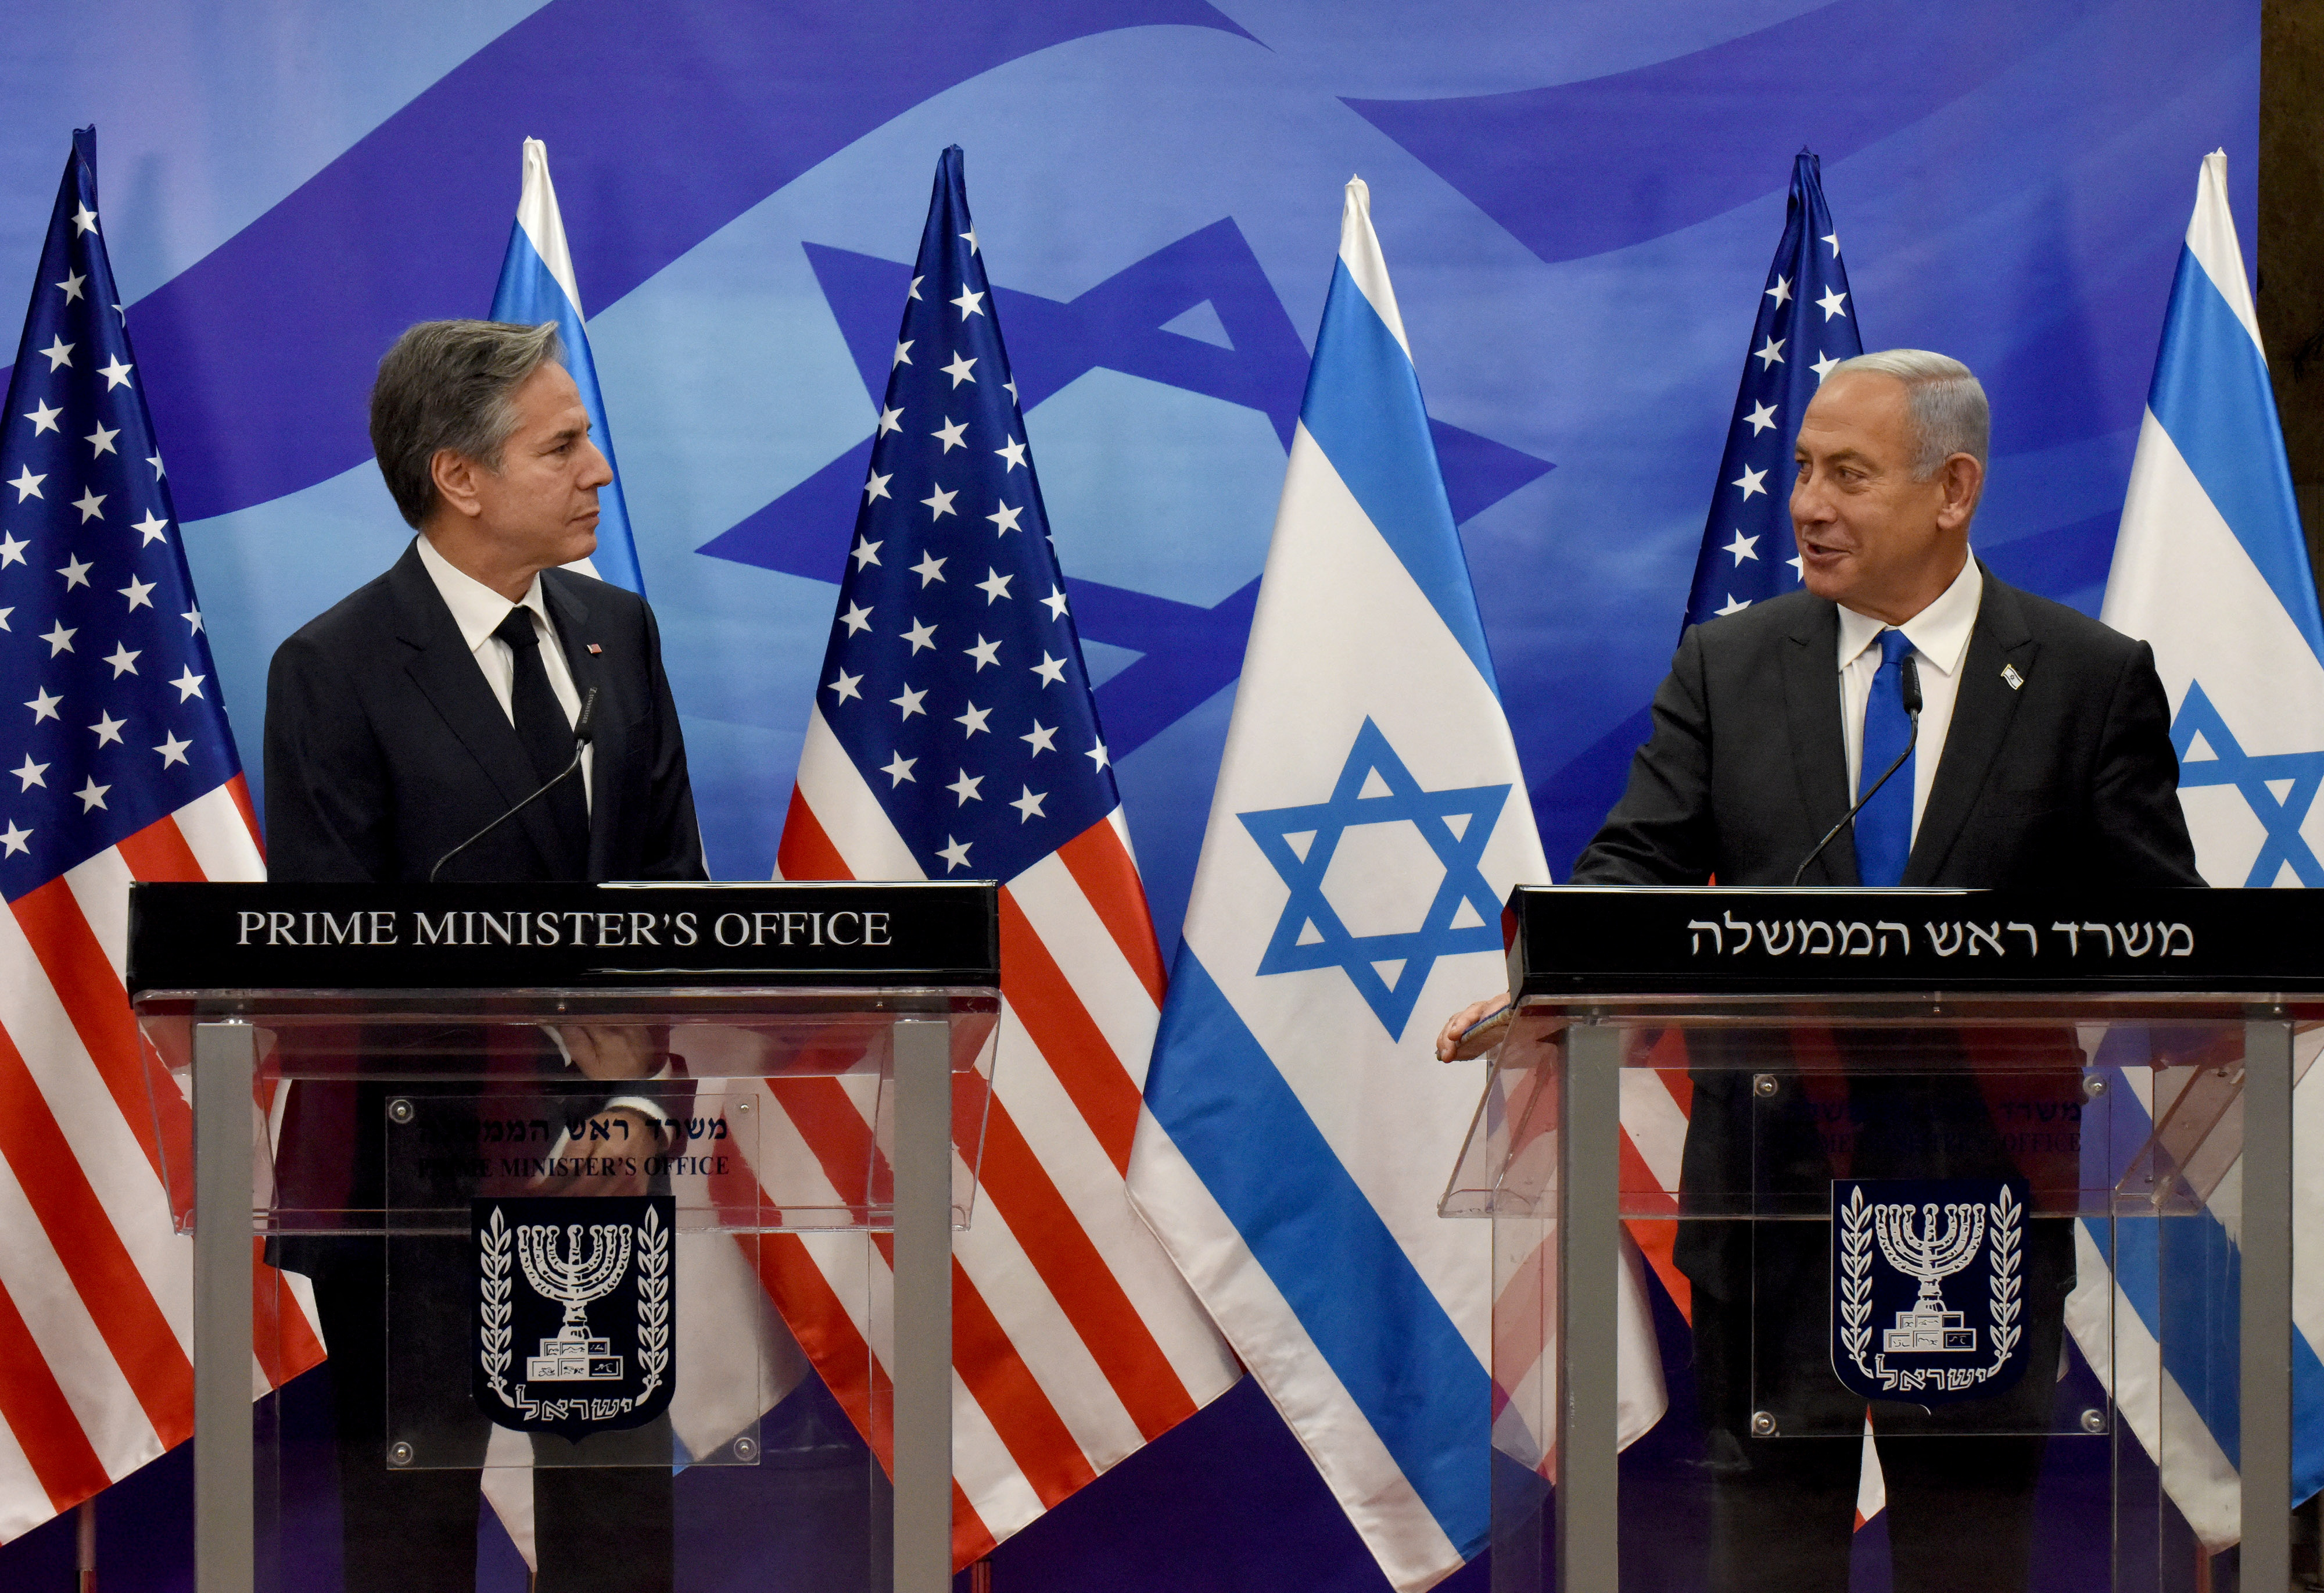 L-R: U.S. Secretary of State Antony Blinken and Israeli Prime Minister Benjamin Netanyahu make statements to the media after their meeting at the Prime Minister's Office in Jerusalem, on Monday, January 30, 2023. DEBBIE HILL/Pool via REUTERS